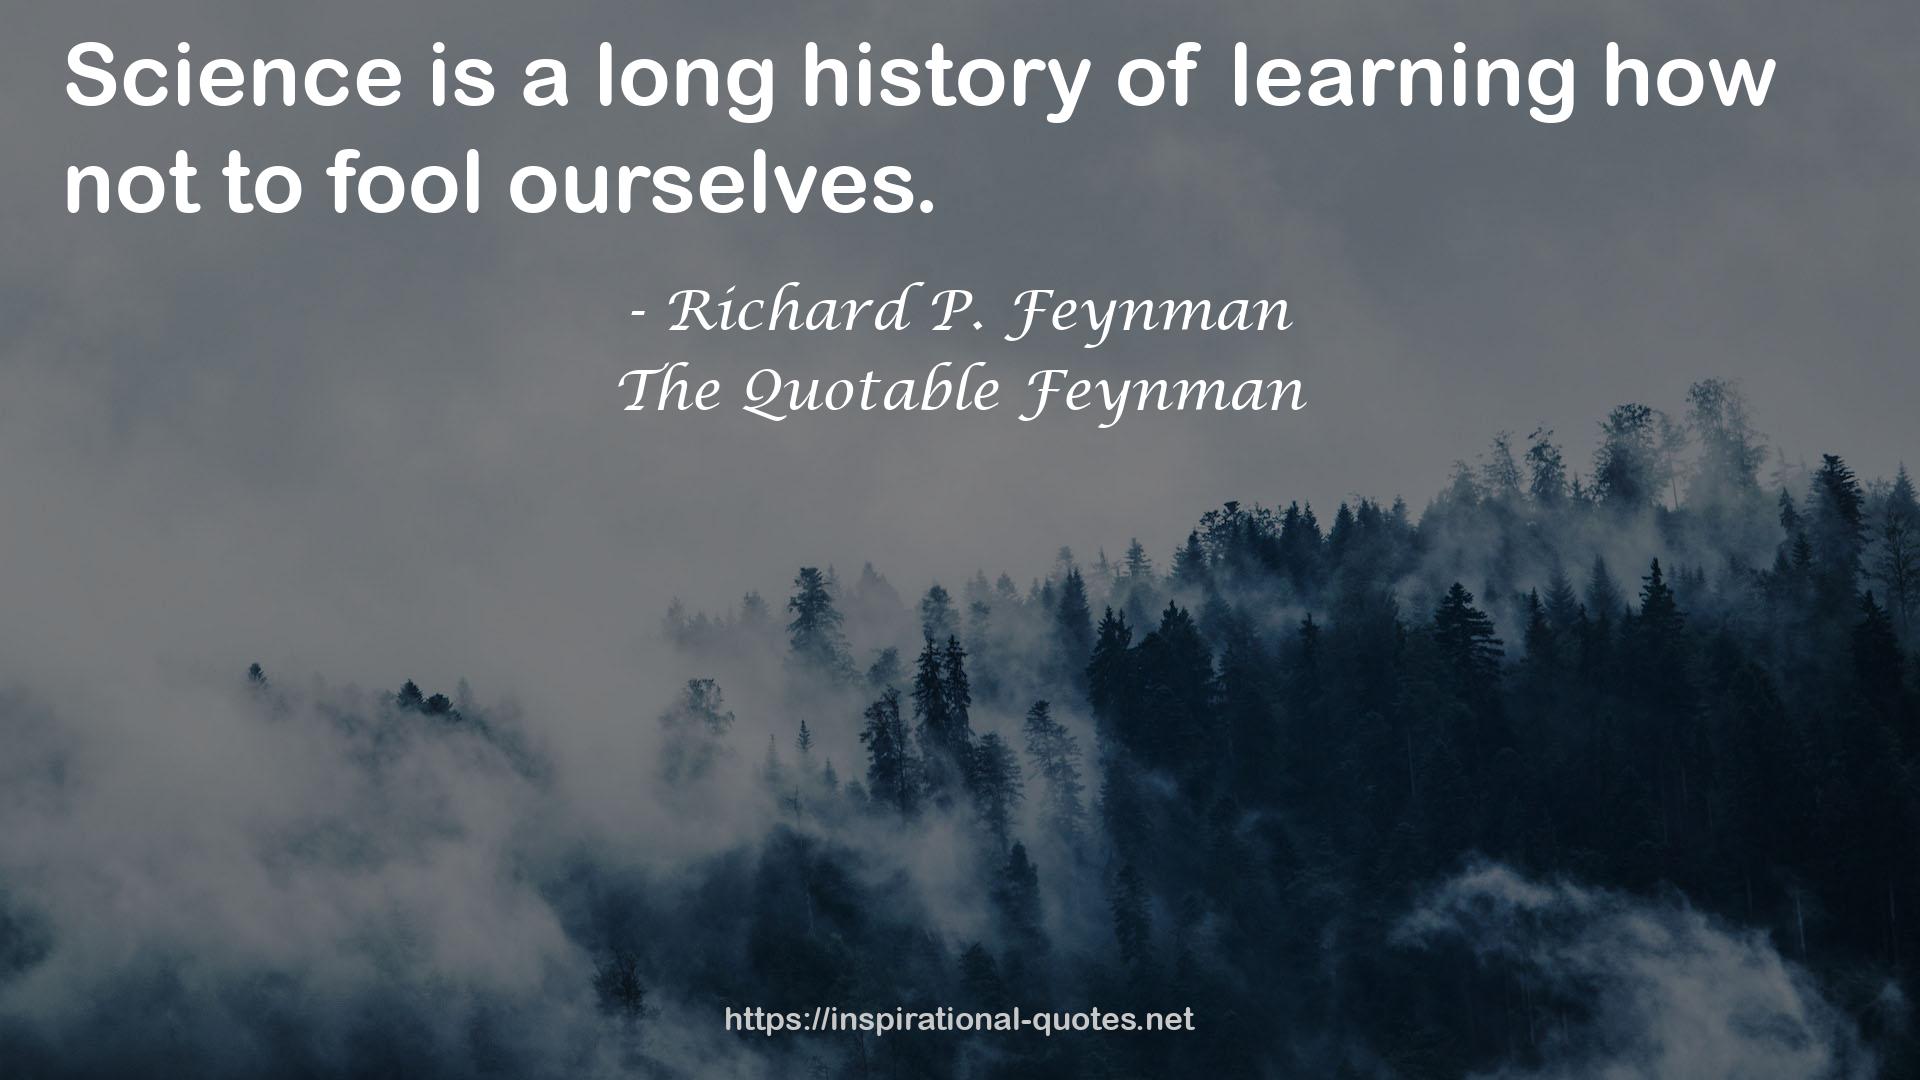 The Quotable Feynman QUOTES